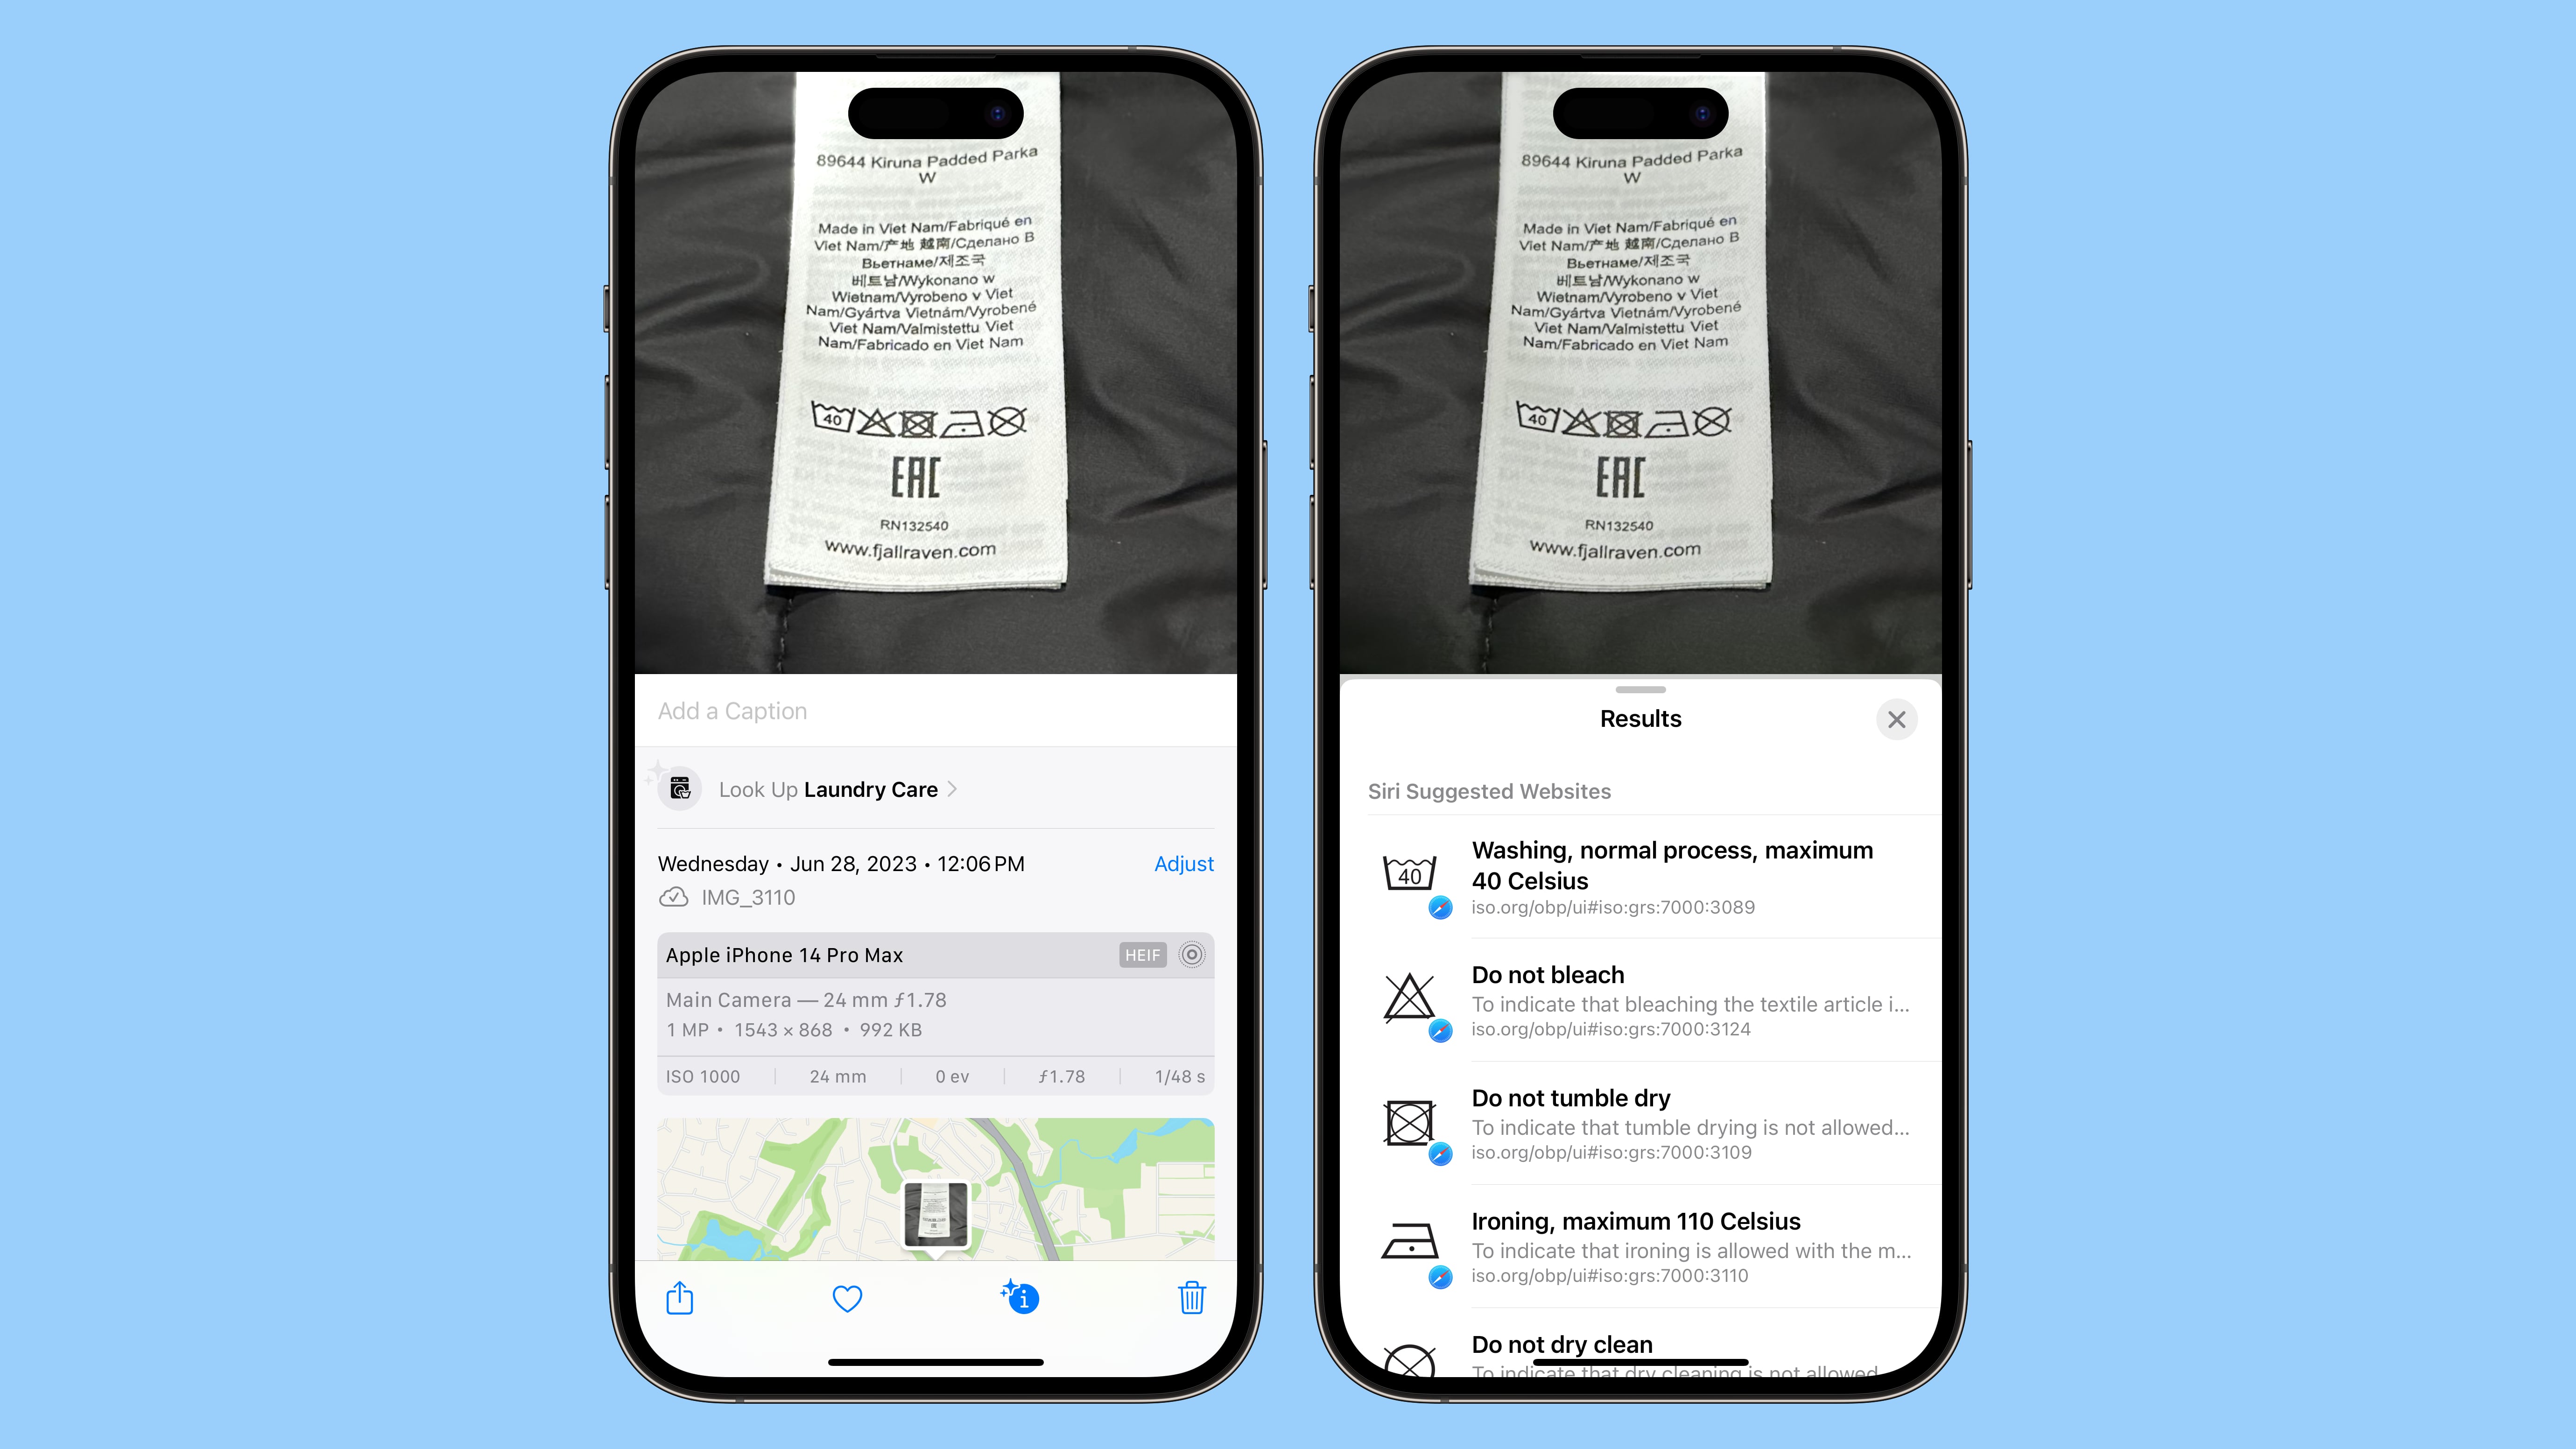 iOS 17 Photos App Can Tell You What Those Confusing Laundry Symbols Mean